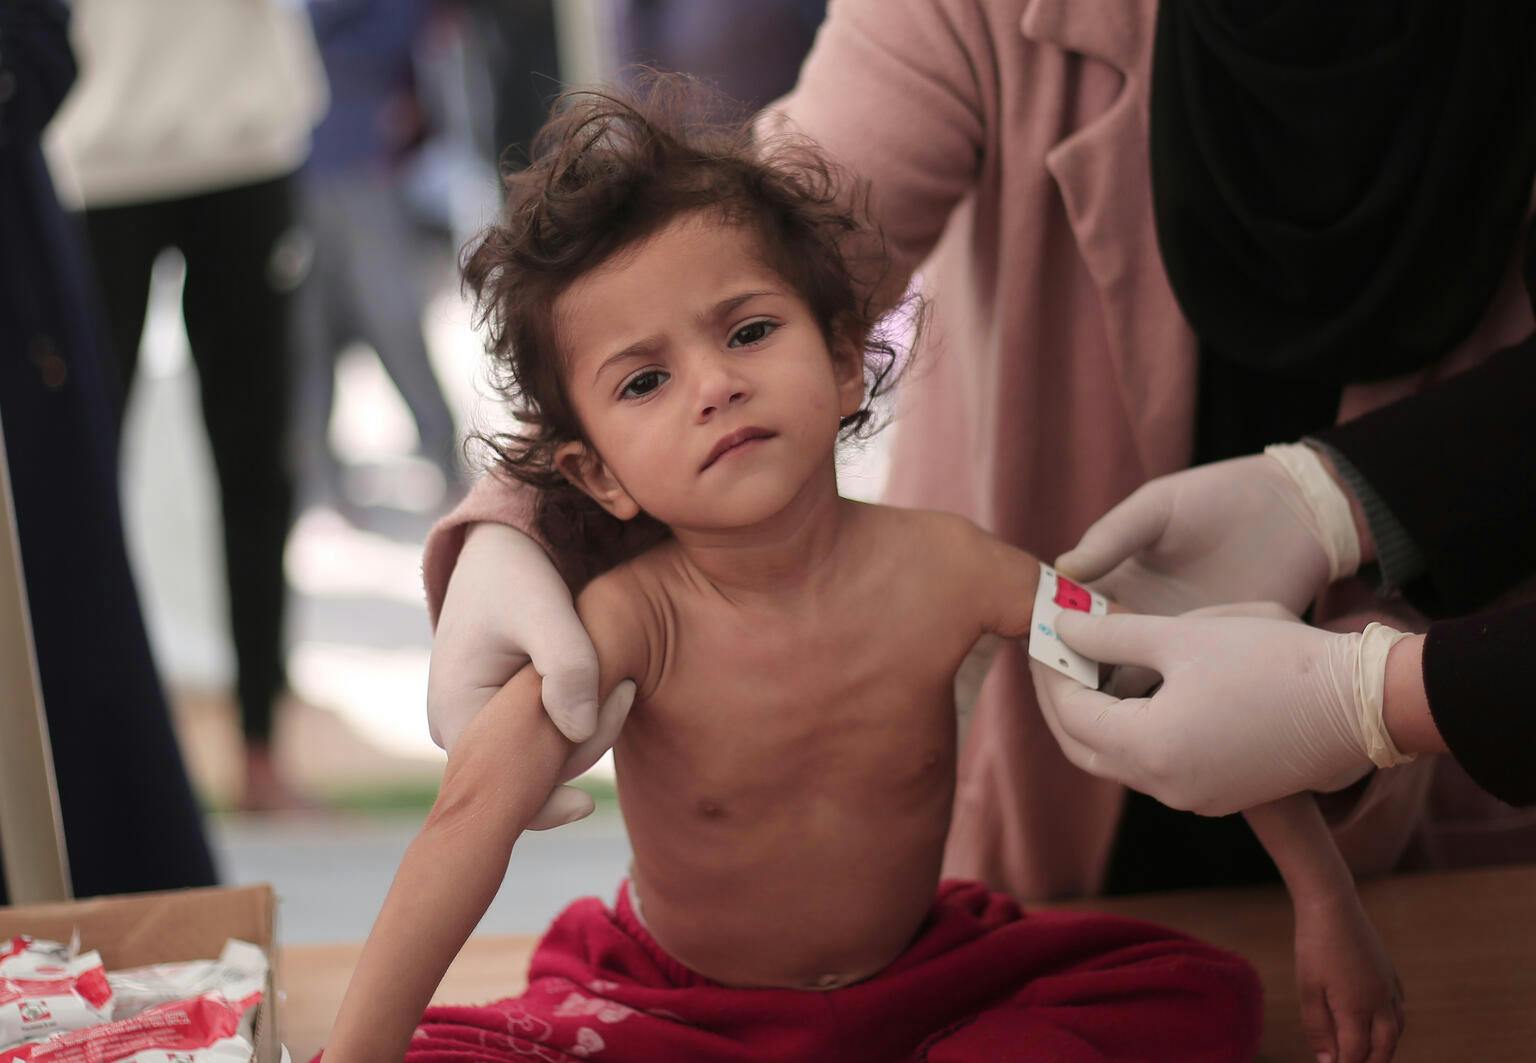 Leen, 2-year-old, middle-upper-arm-circumference reading is dangerously low at less than 10 indicating severe acute malnutrition